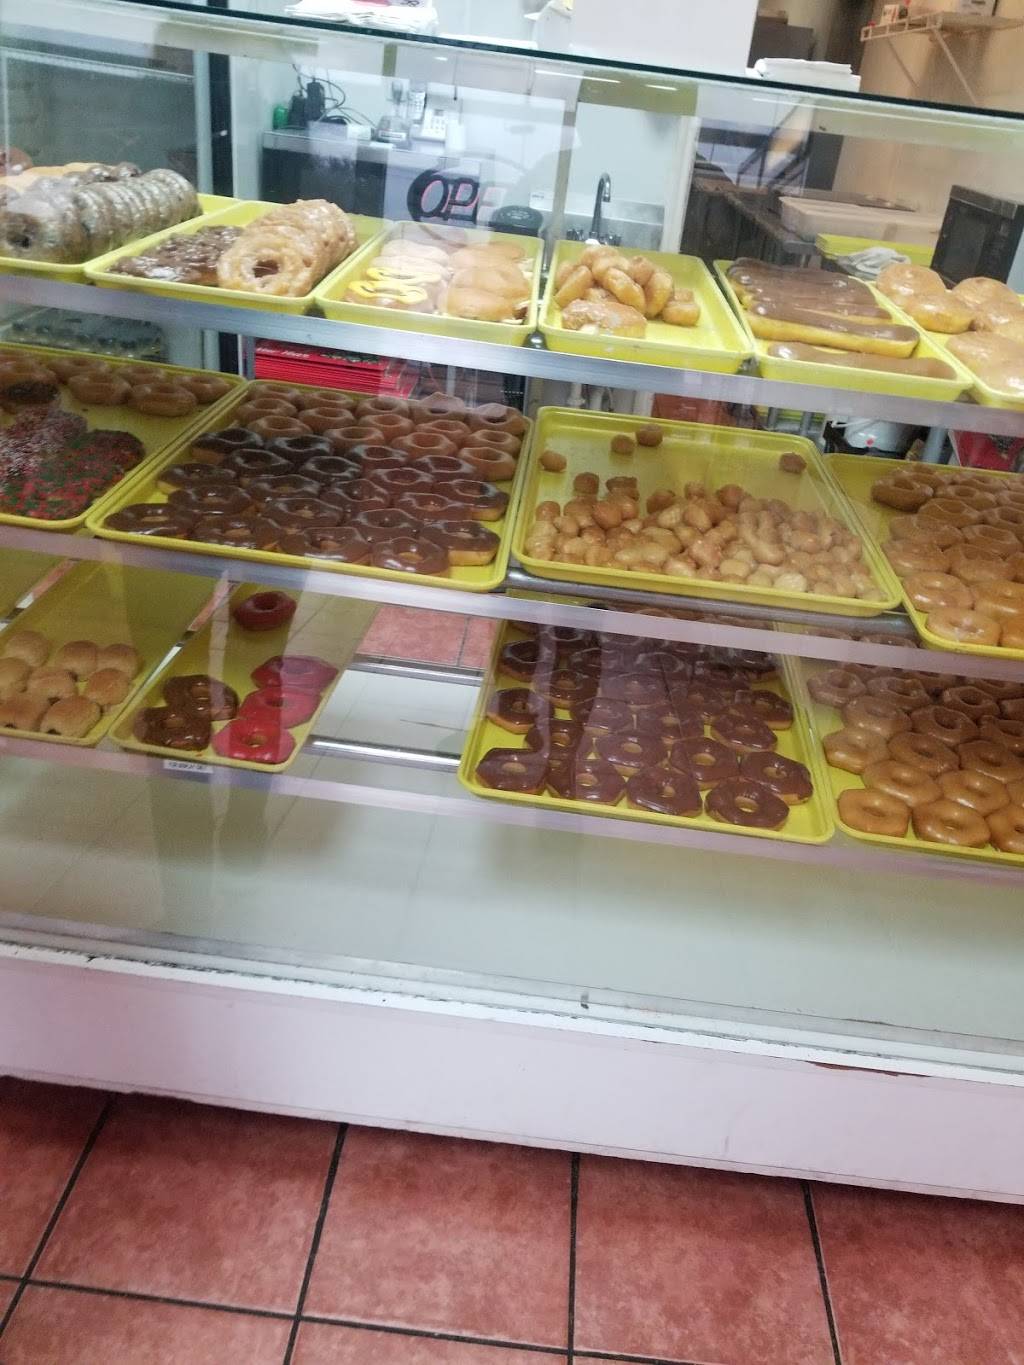 My Donuts | 8550 S Hulen St, Fort Worth, TX 76123, USA | Phone: (817) 370-7879